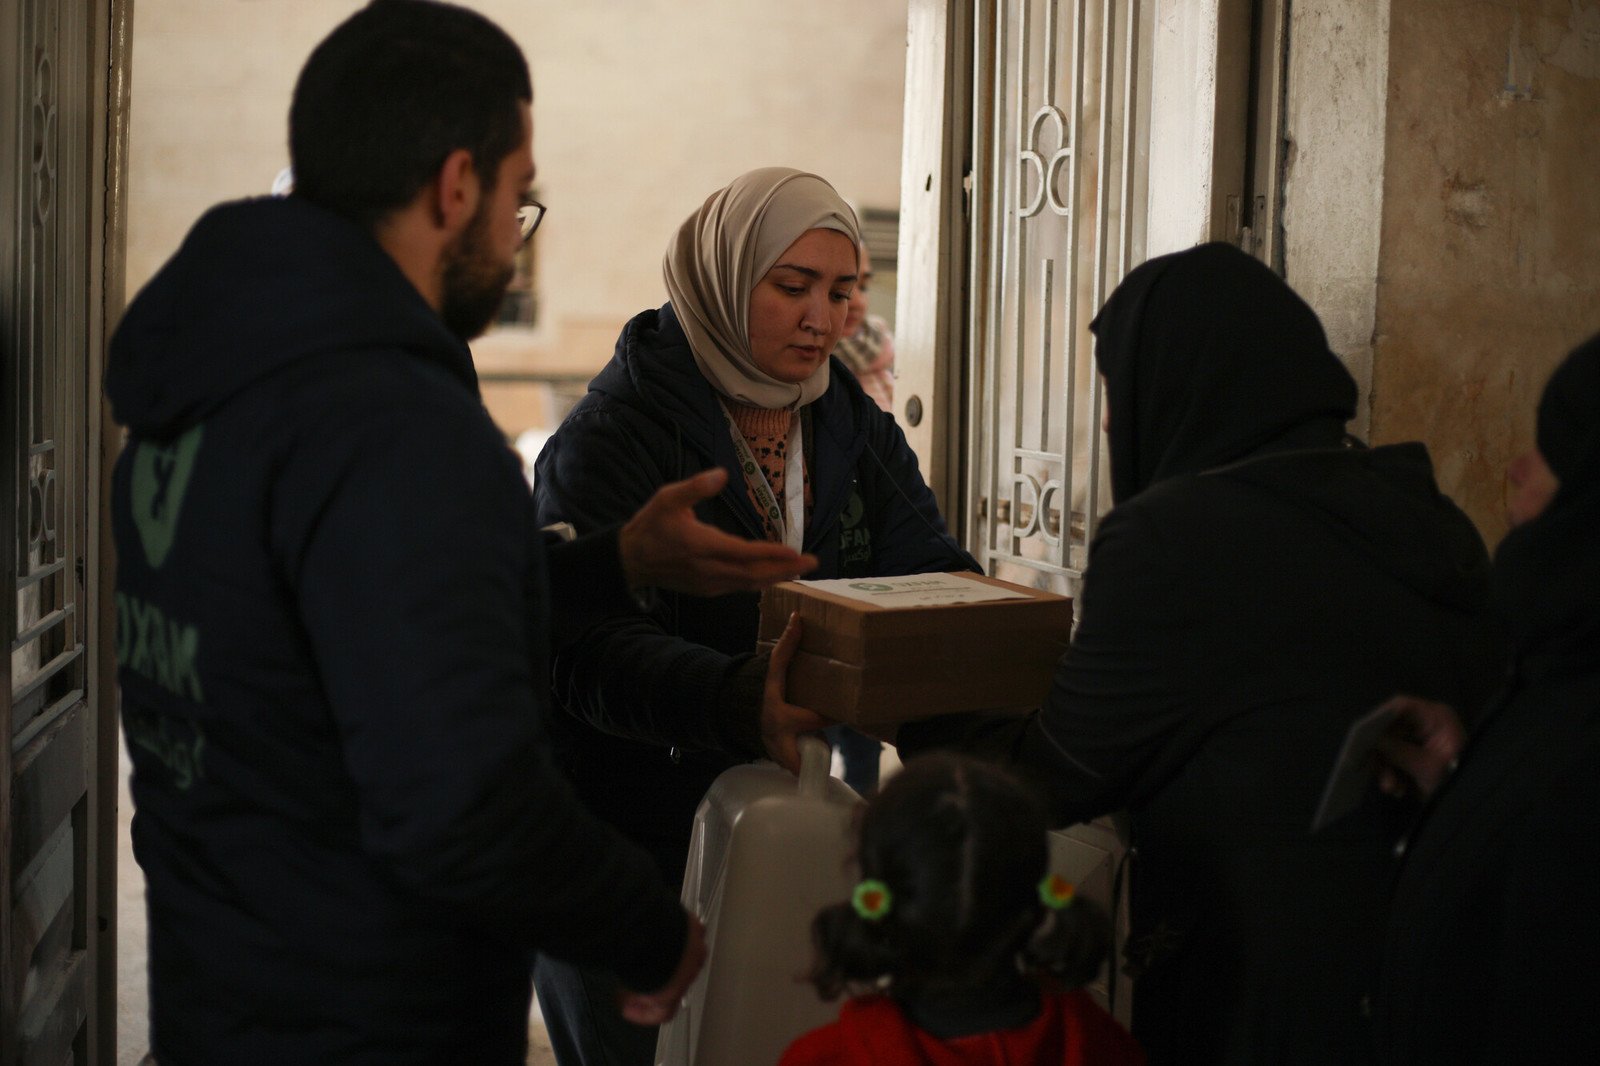 Oxfam delivering hygiene items to families in one of the shelters in Aleppo city.